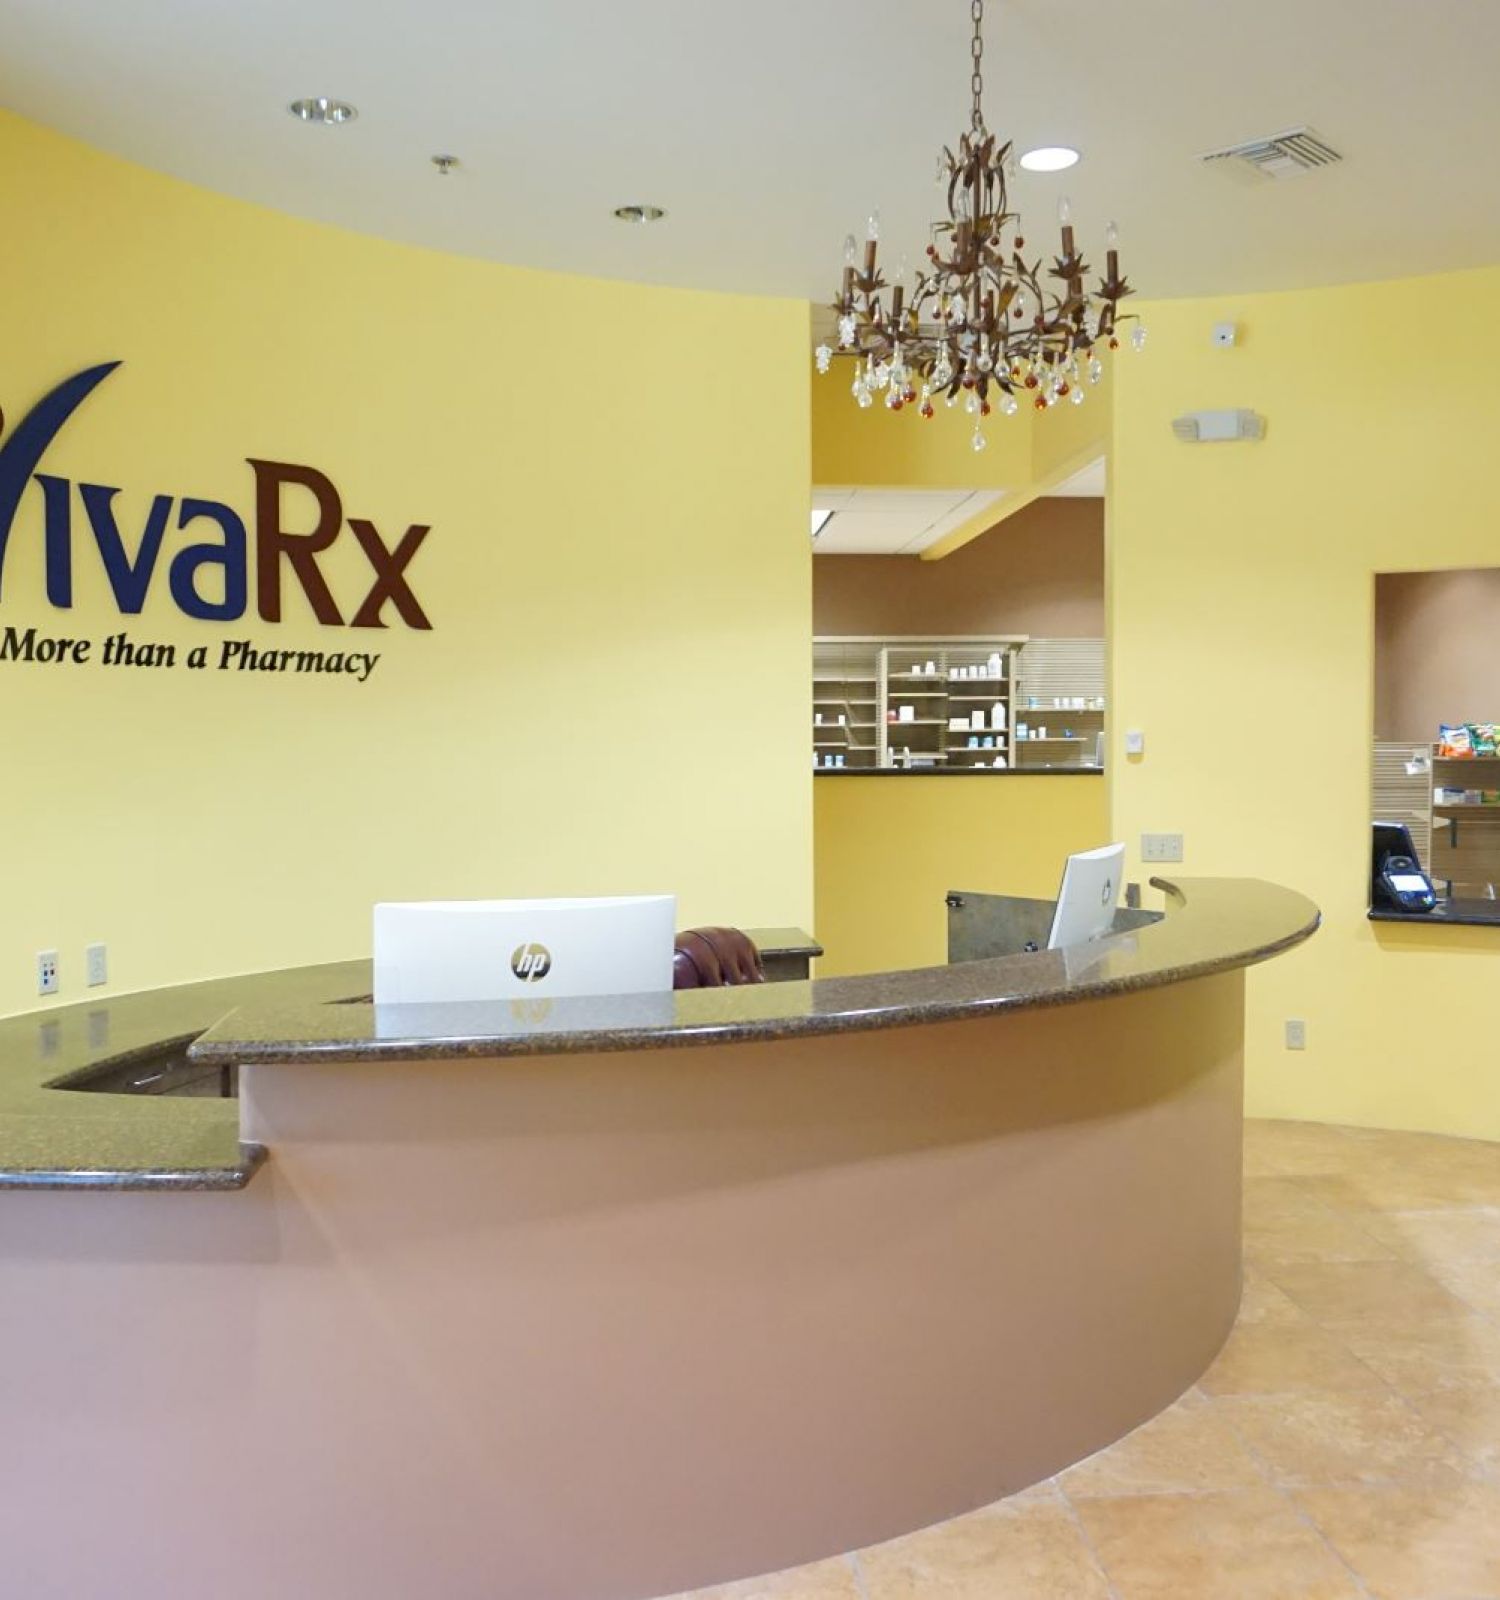 A pharmacy reception area with a sign 